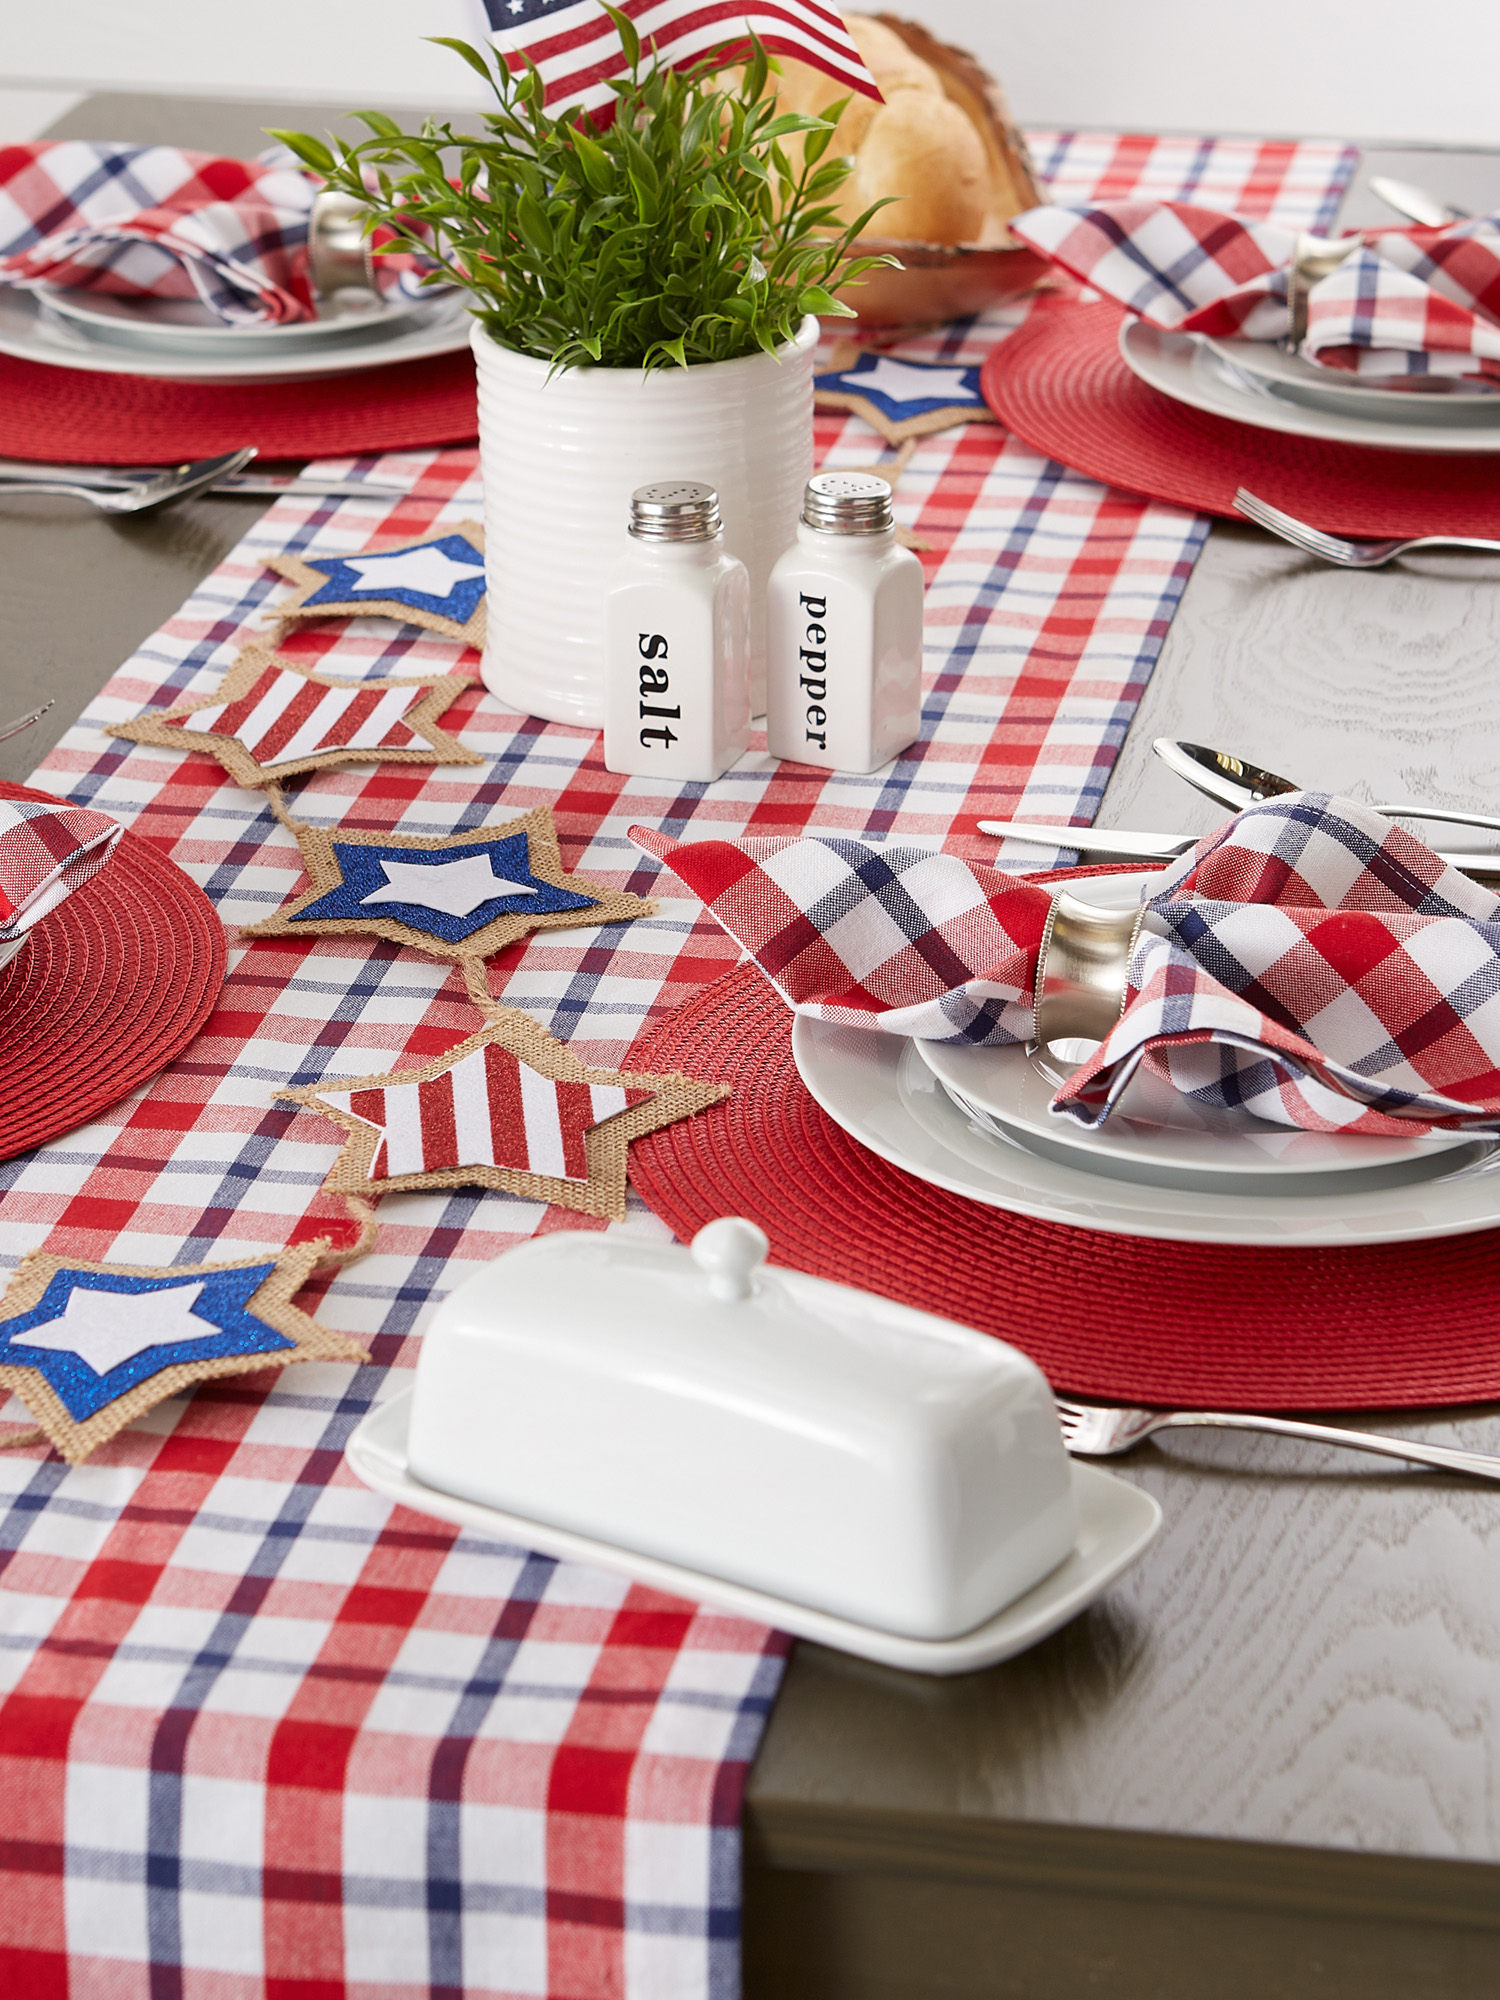 Contemporary Home Living 14" x 108" Red and White Plaid Table Runner